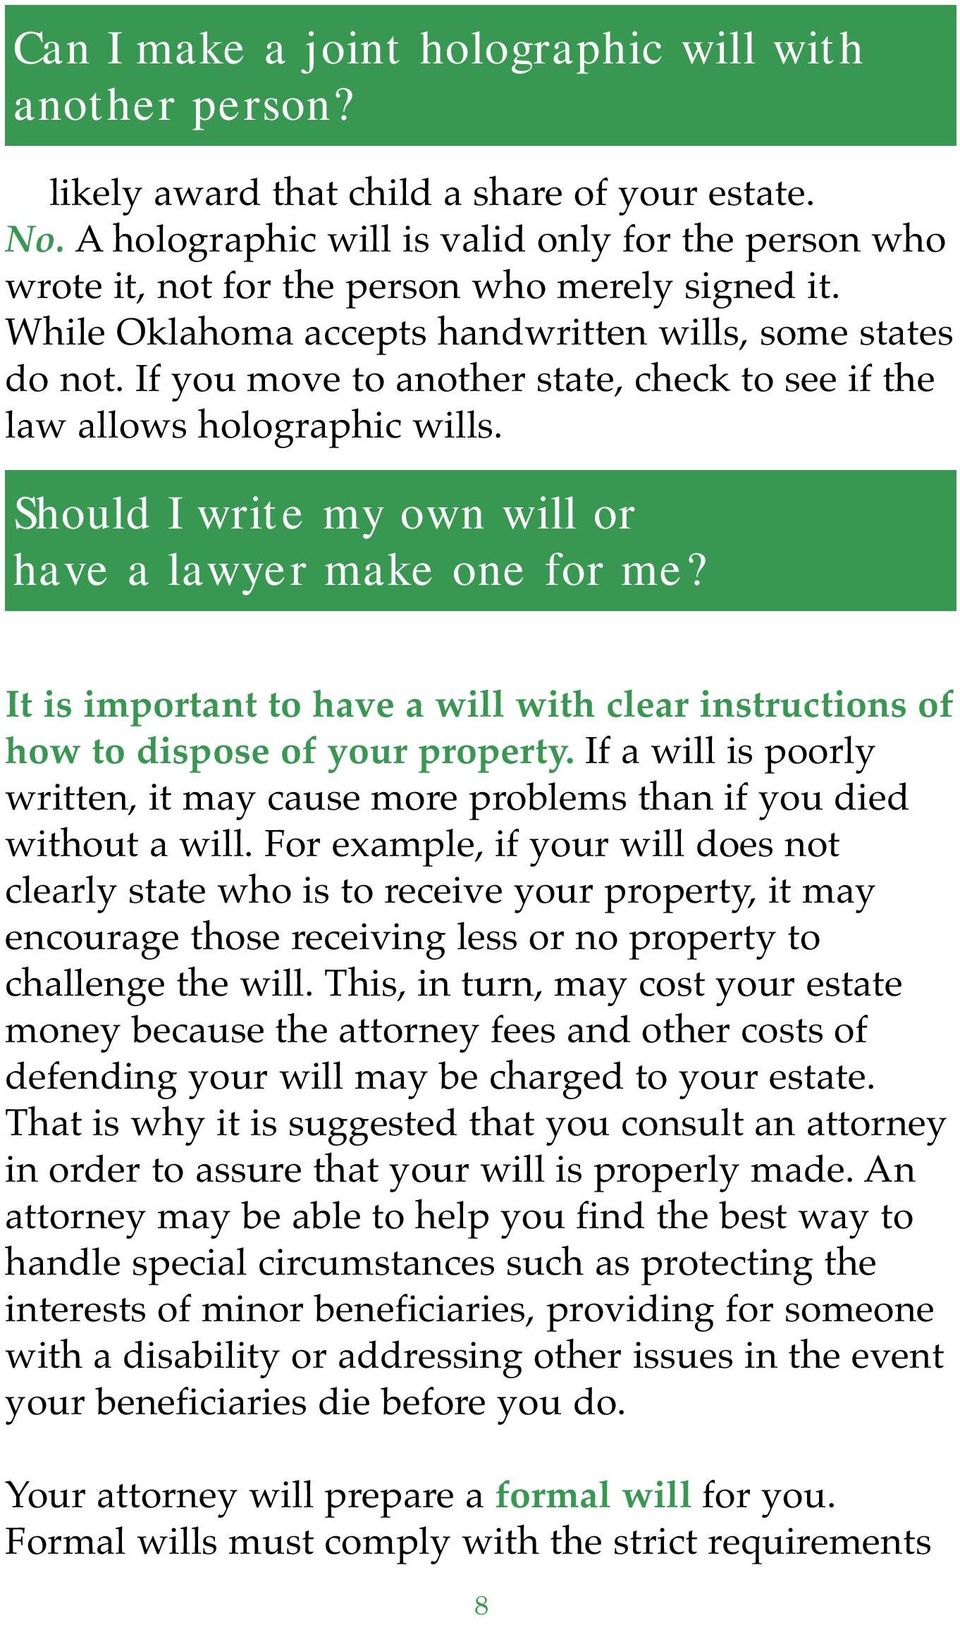 If you move to another state, check to see if the law allows holographic wills. Should I write my own will or have a lawyer make one for me?